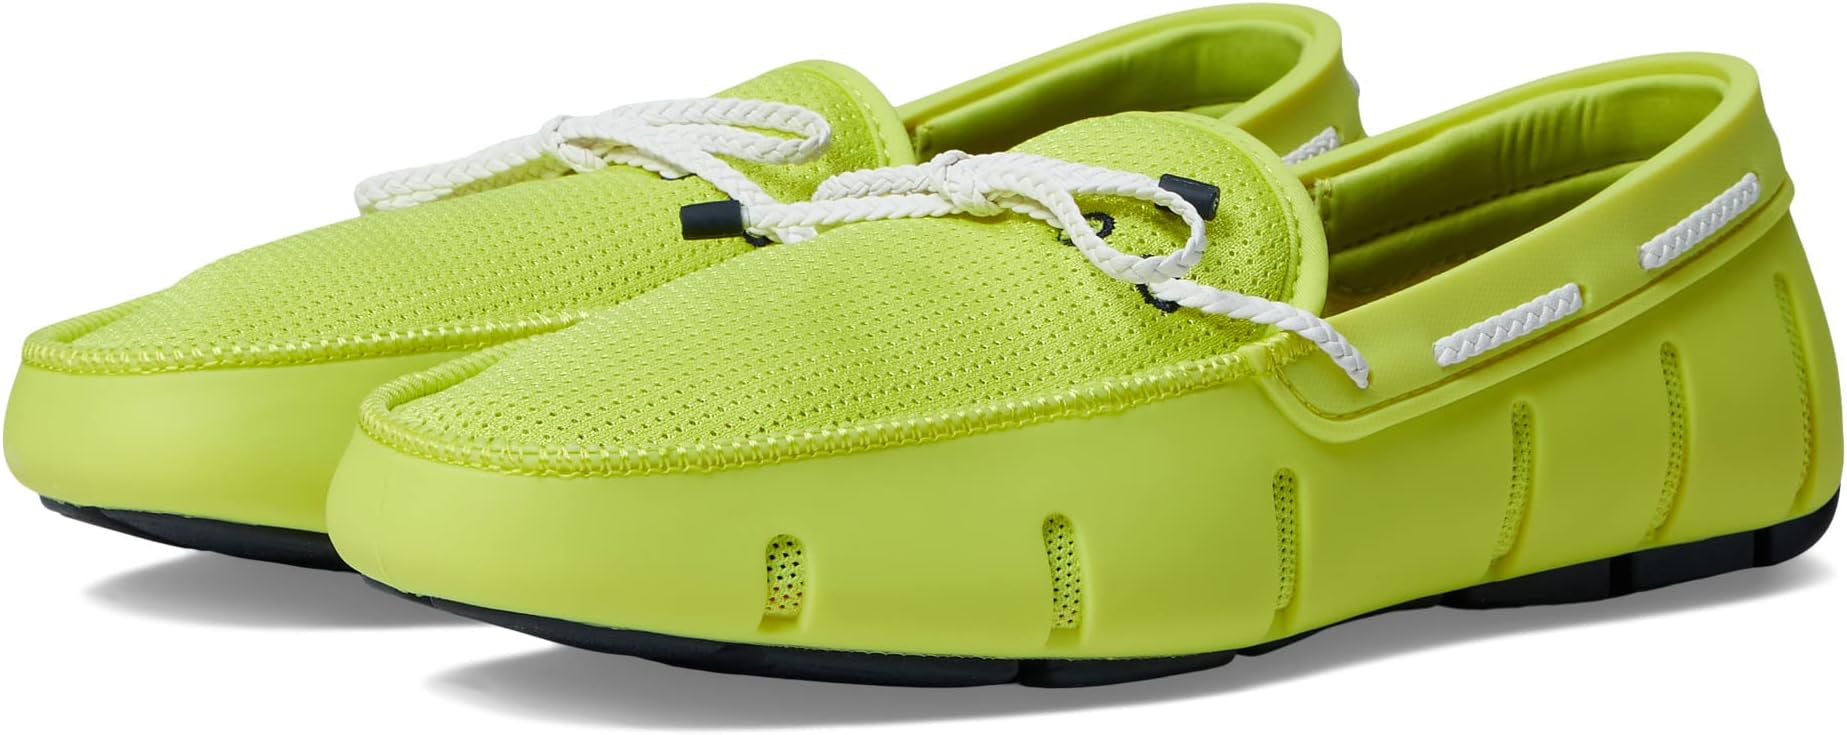 Лоферы Braided Lace Loafer SWIMS, цвет Citron фото